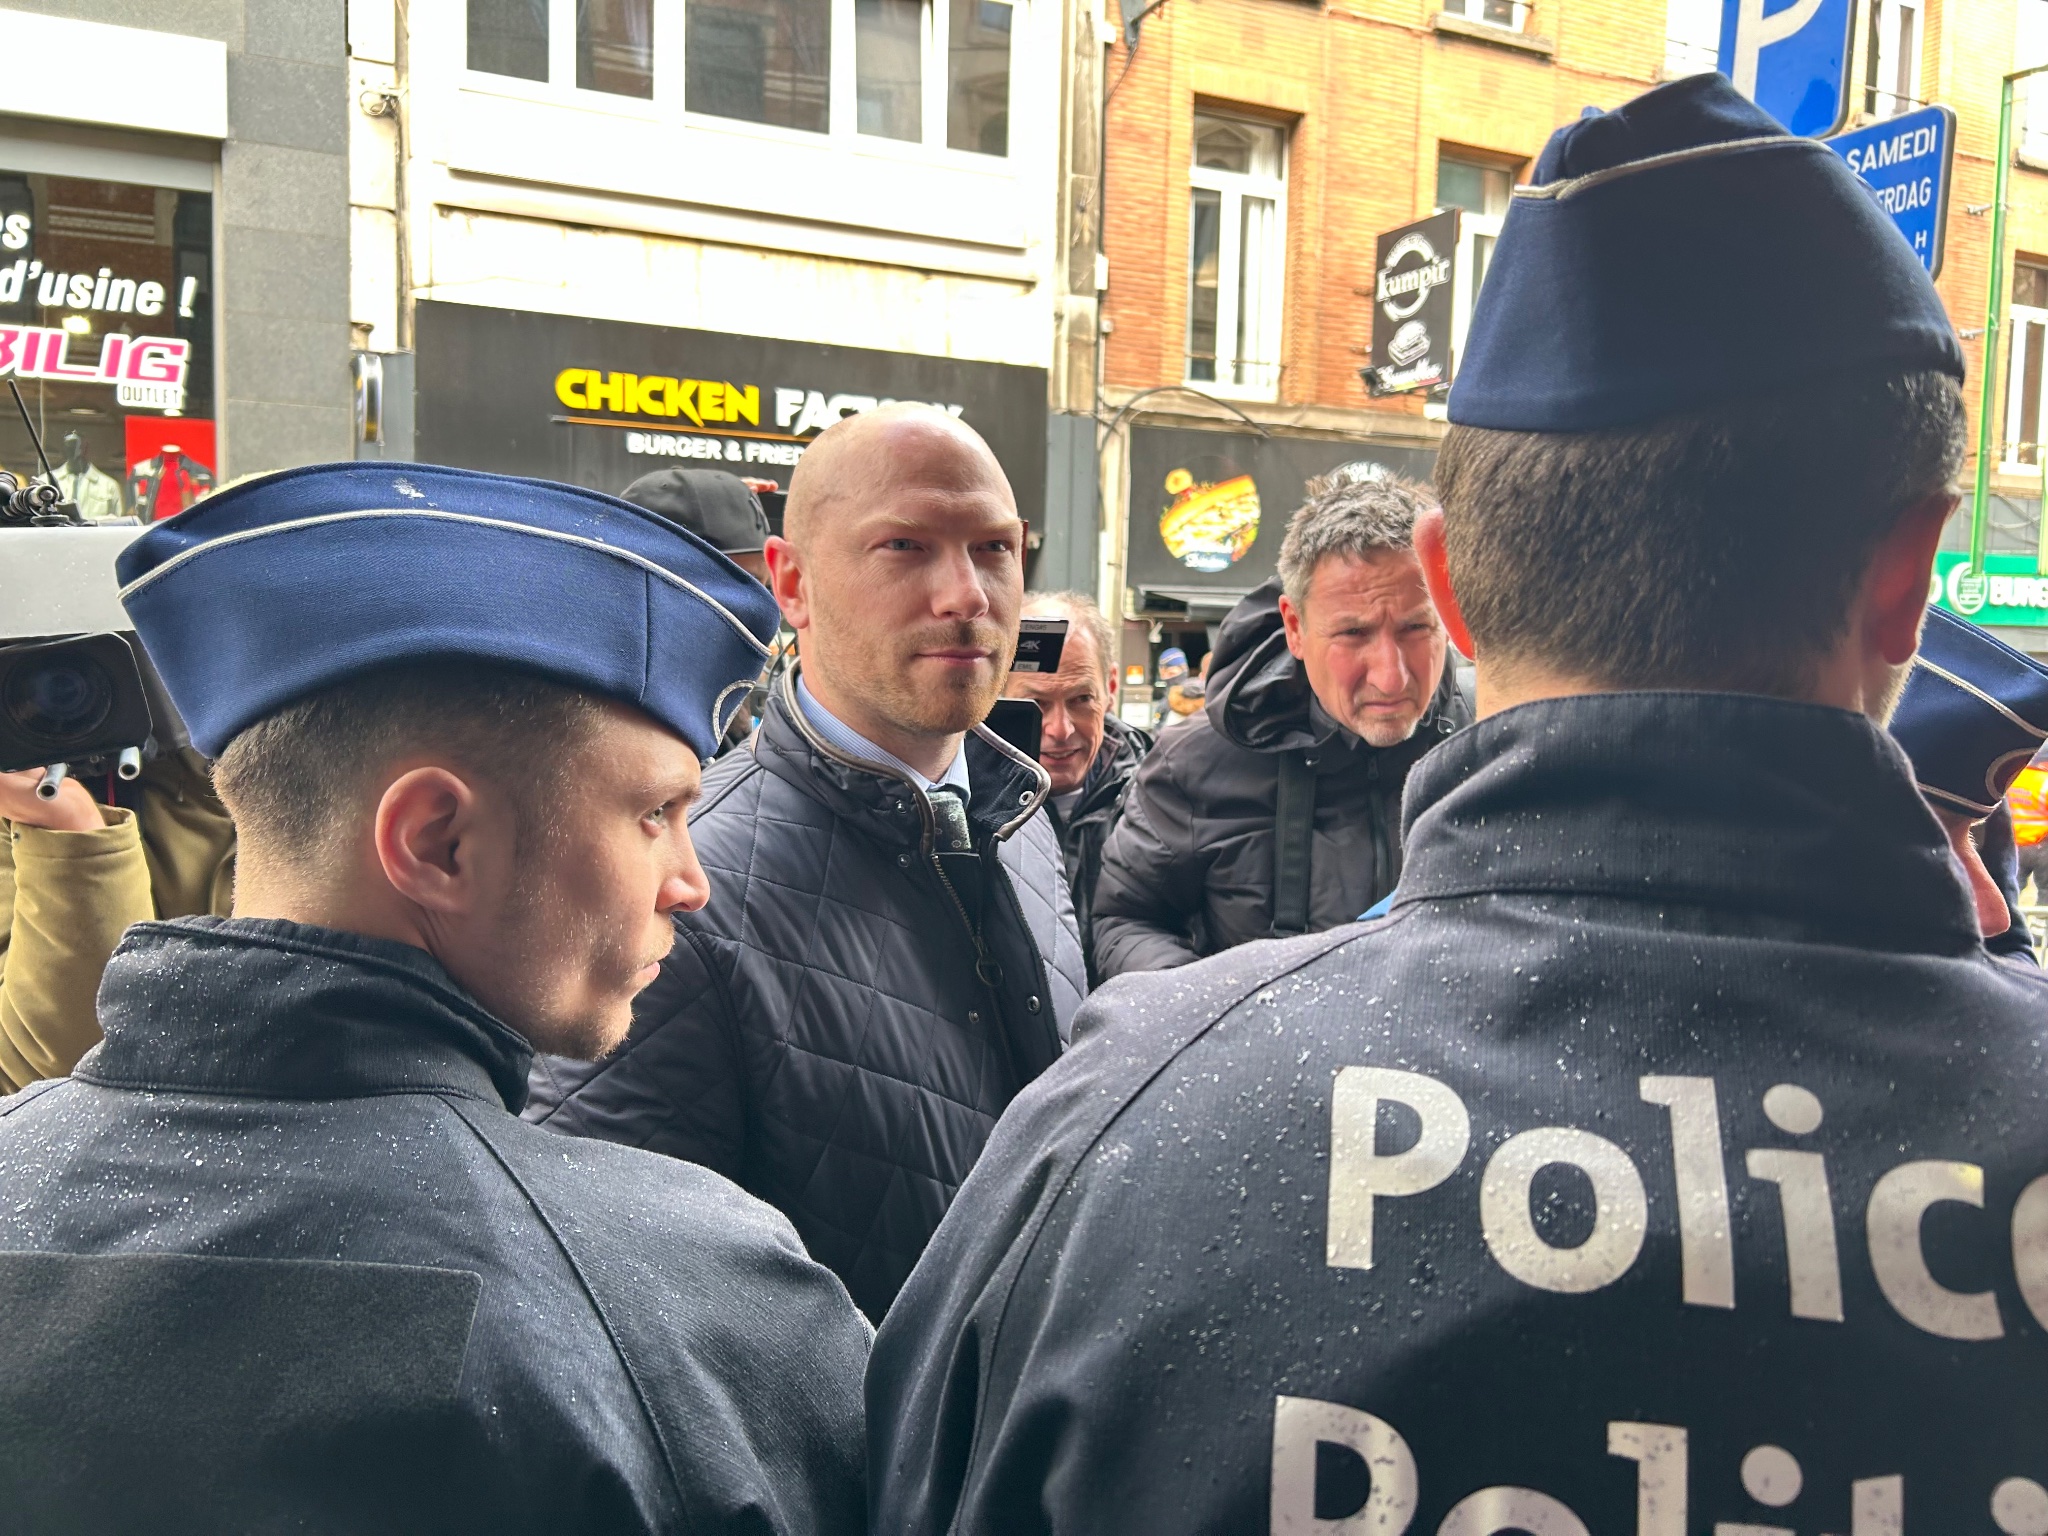 NEW: ADF International backs emergency legal challenge after Brussels police shut down “NatCon” conference citing views on abortion, marriage, and the European Union